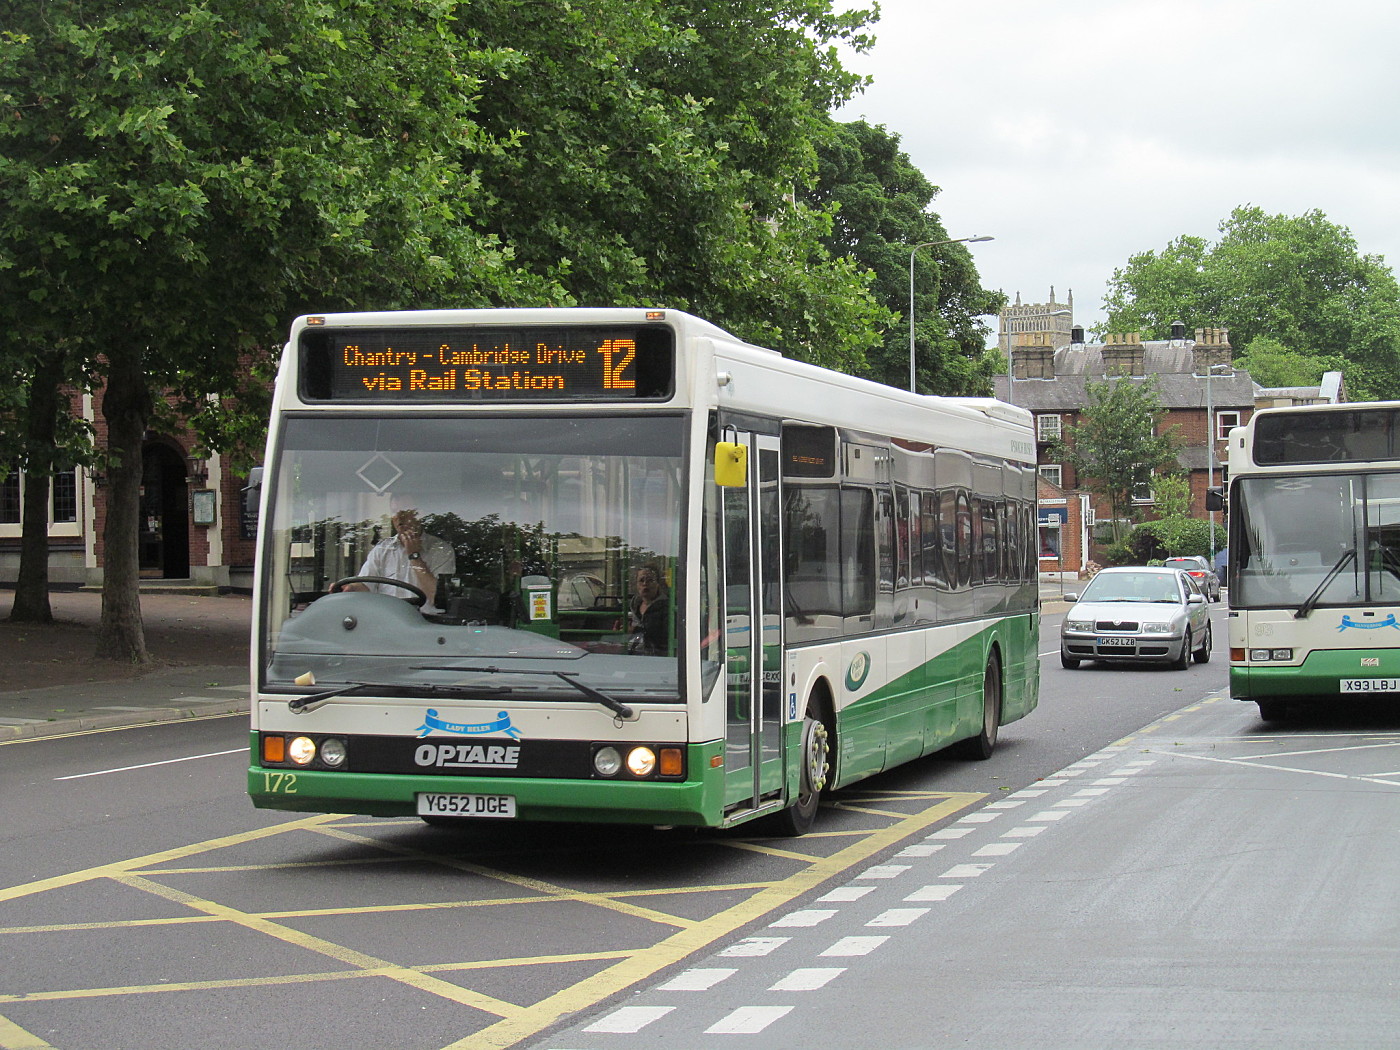 Optare Excel #172